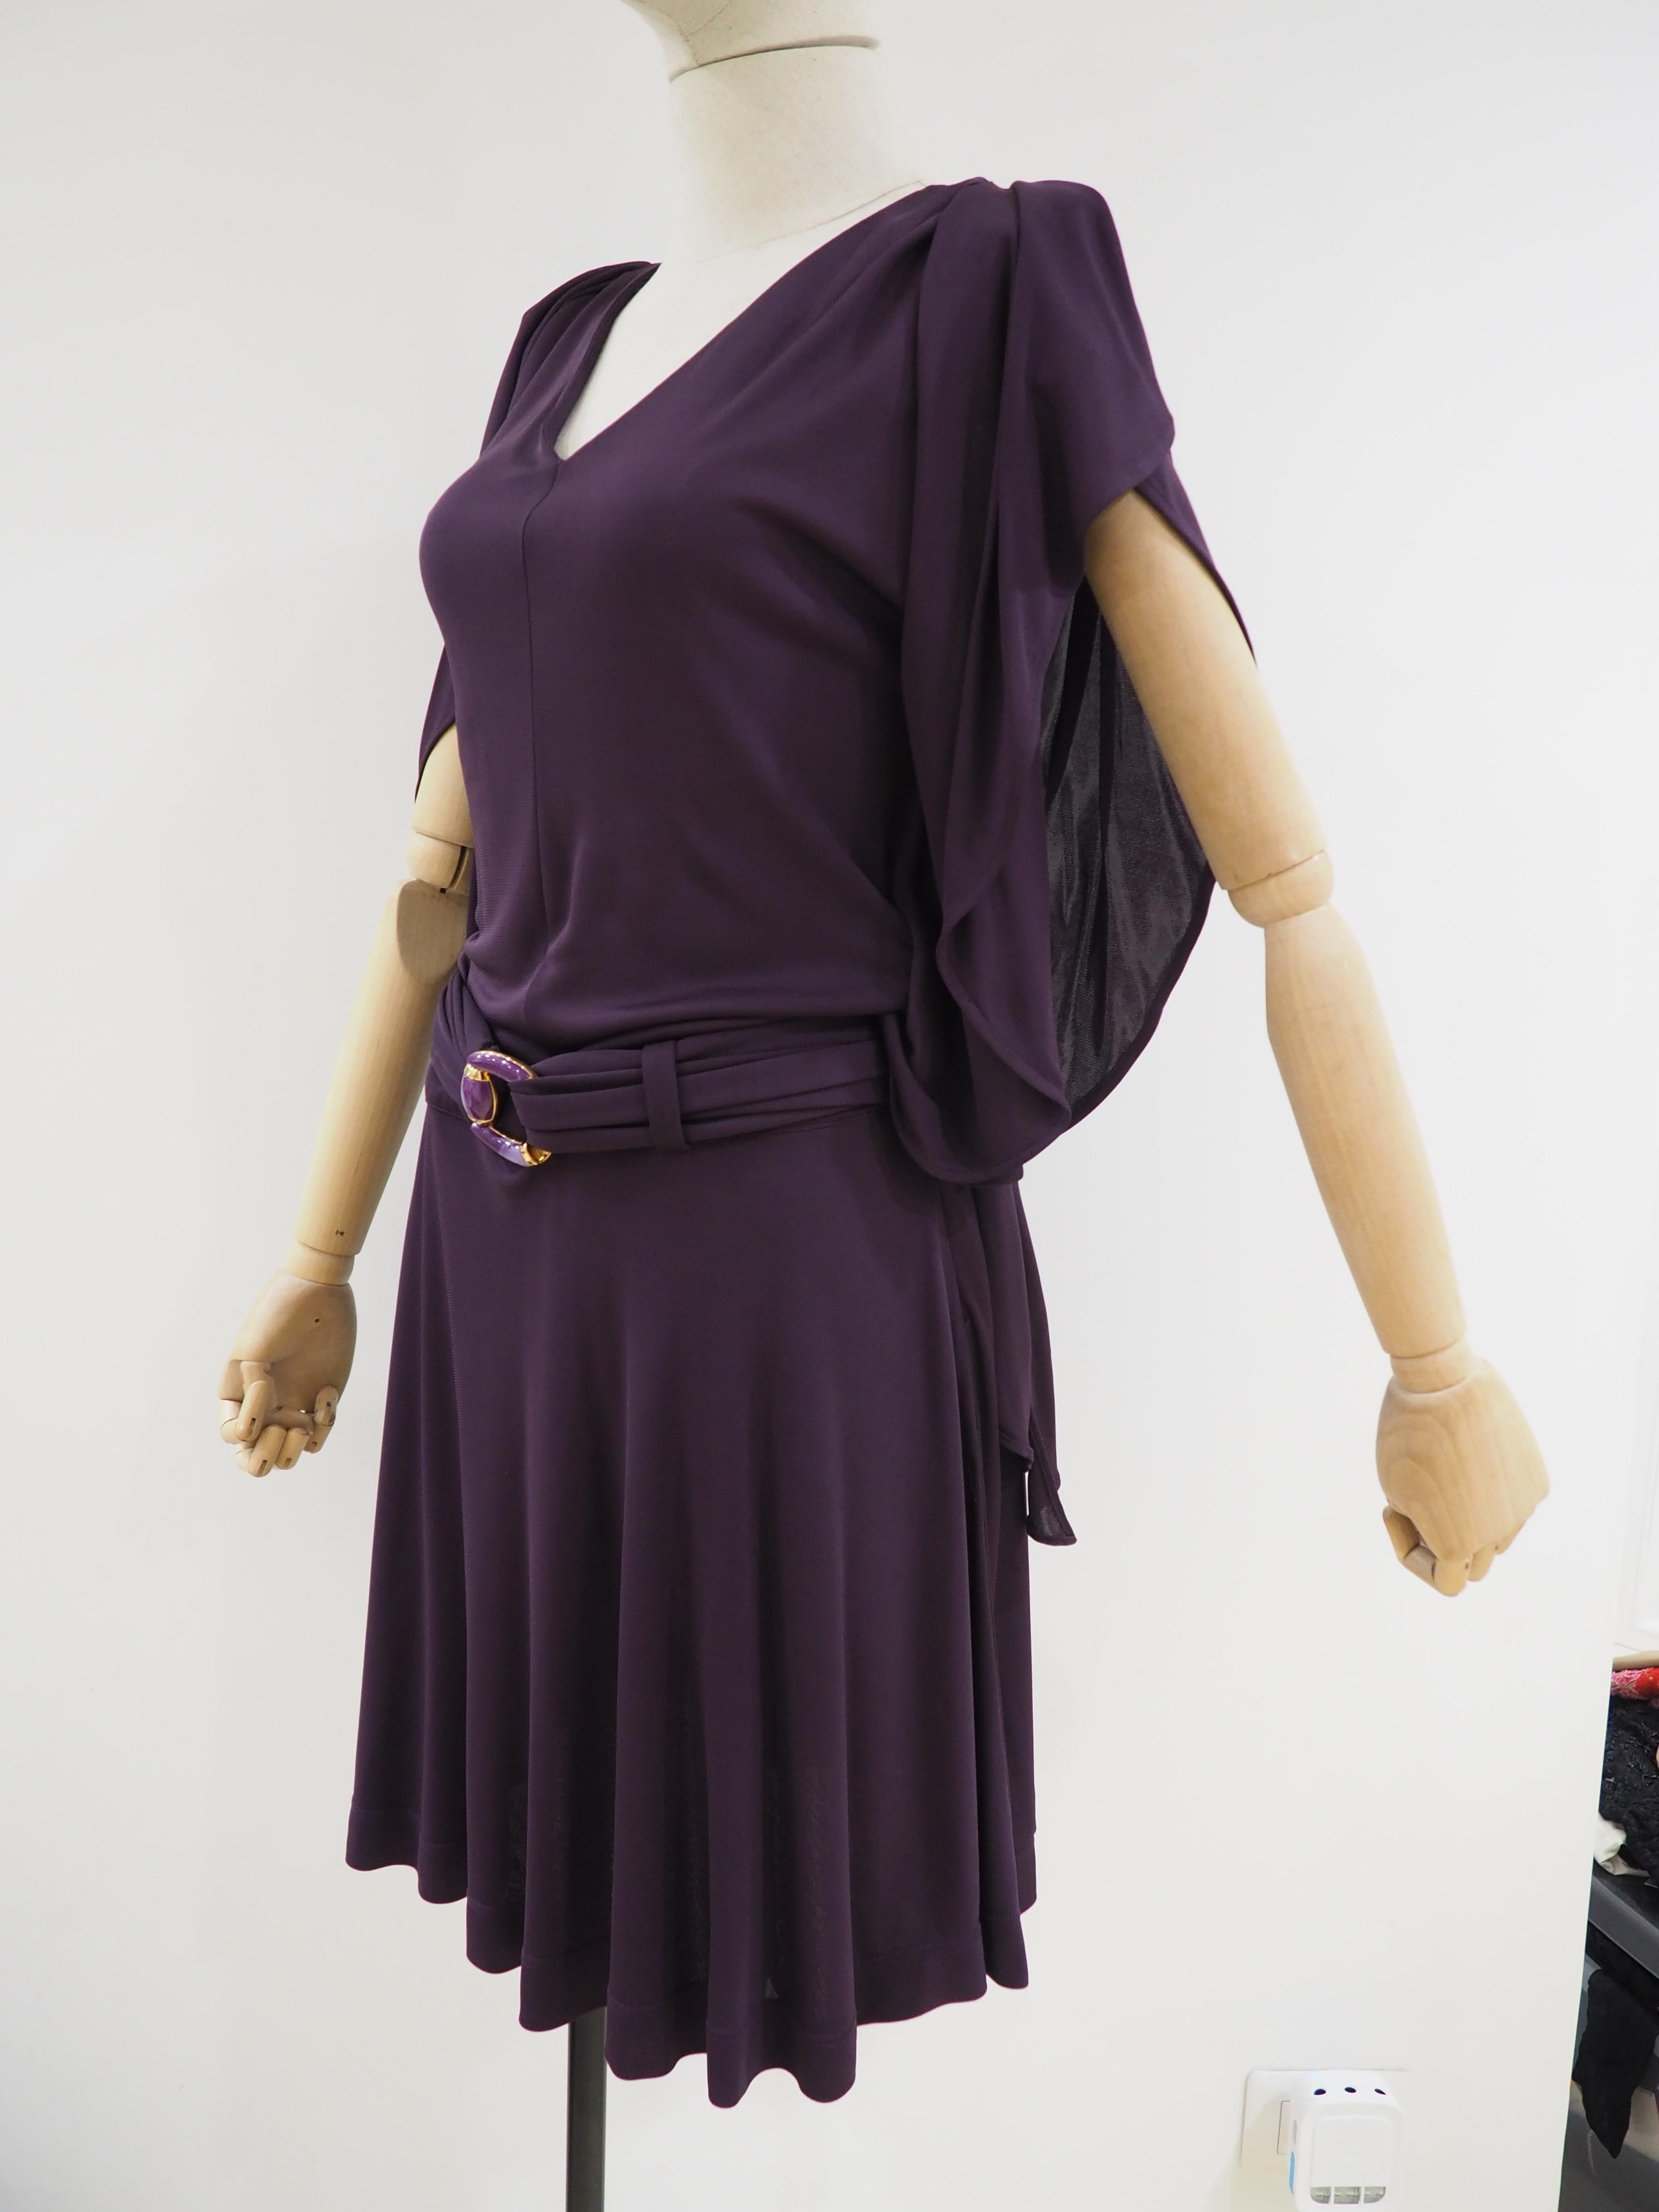 Gucci purple dress
totally made in italy in size S